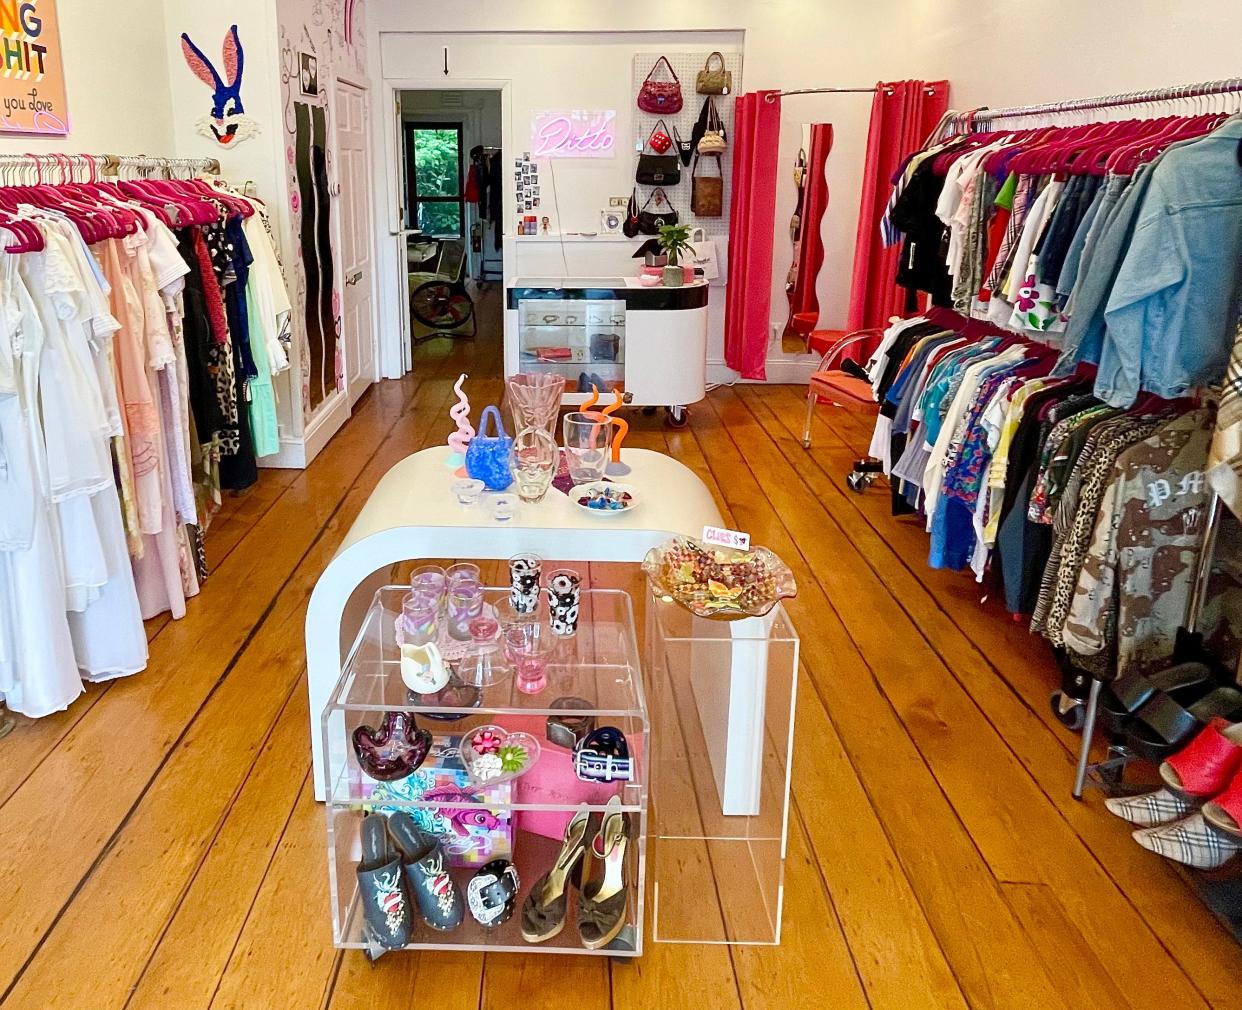 Ditto Vintage, in New Hope, sells vintage, secondhand and modern thrifted clothing, accessories and small housewares, with a focus on 90s and Y2K styles, while specializing in designer and upcycled garments.